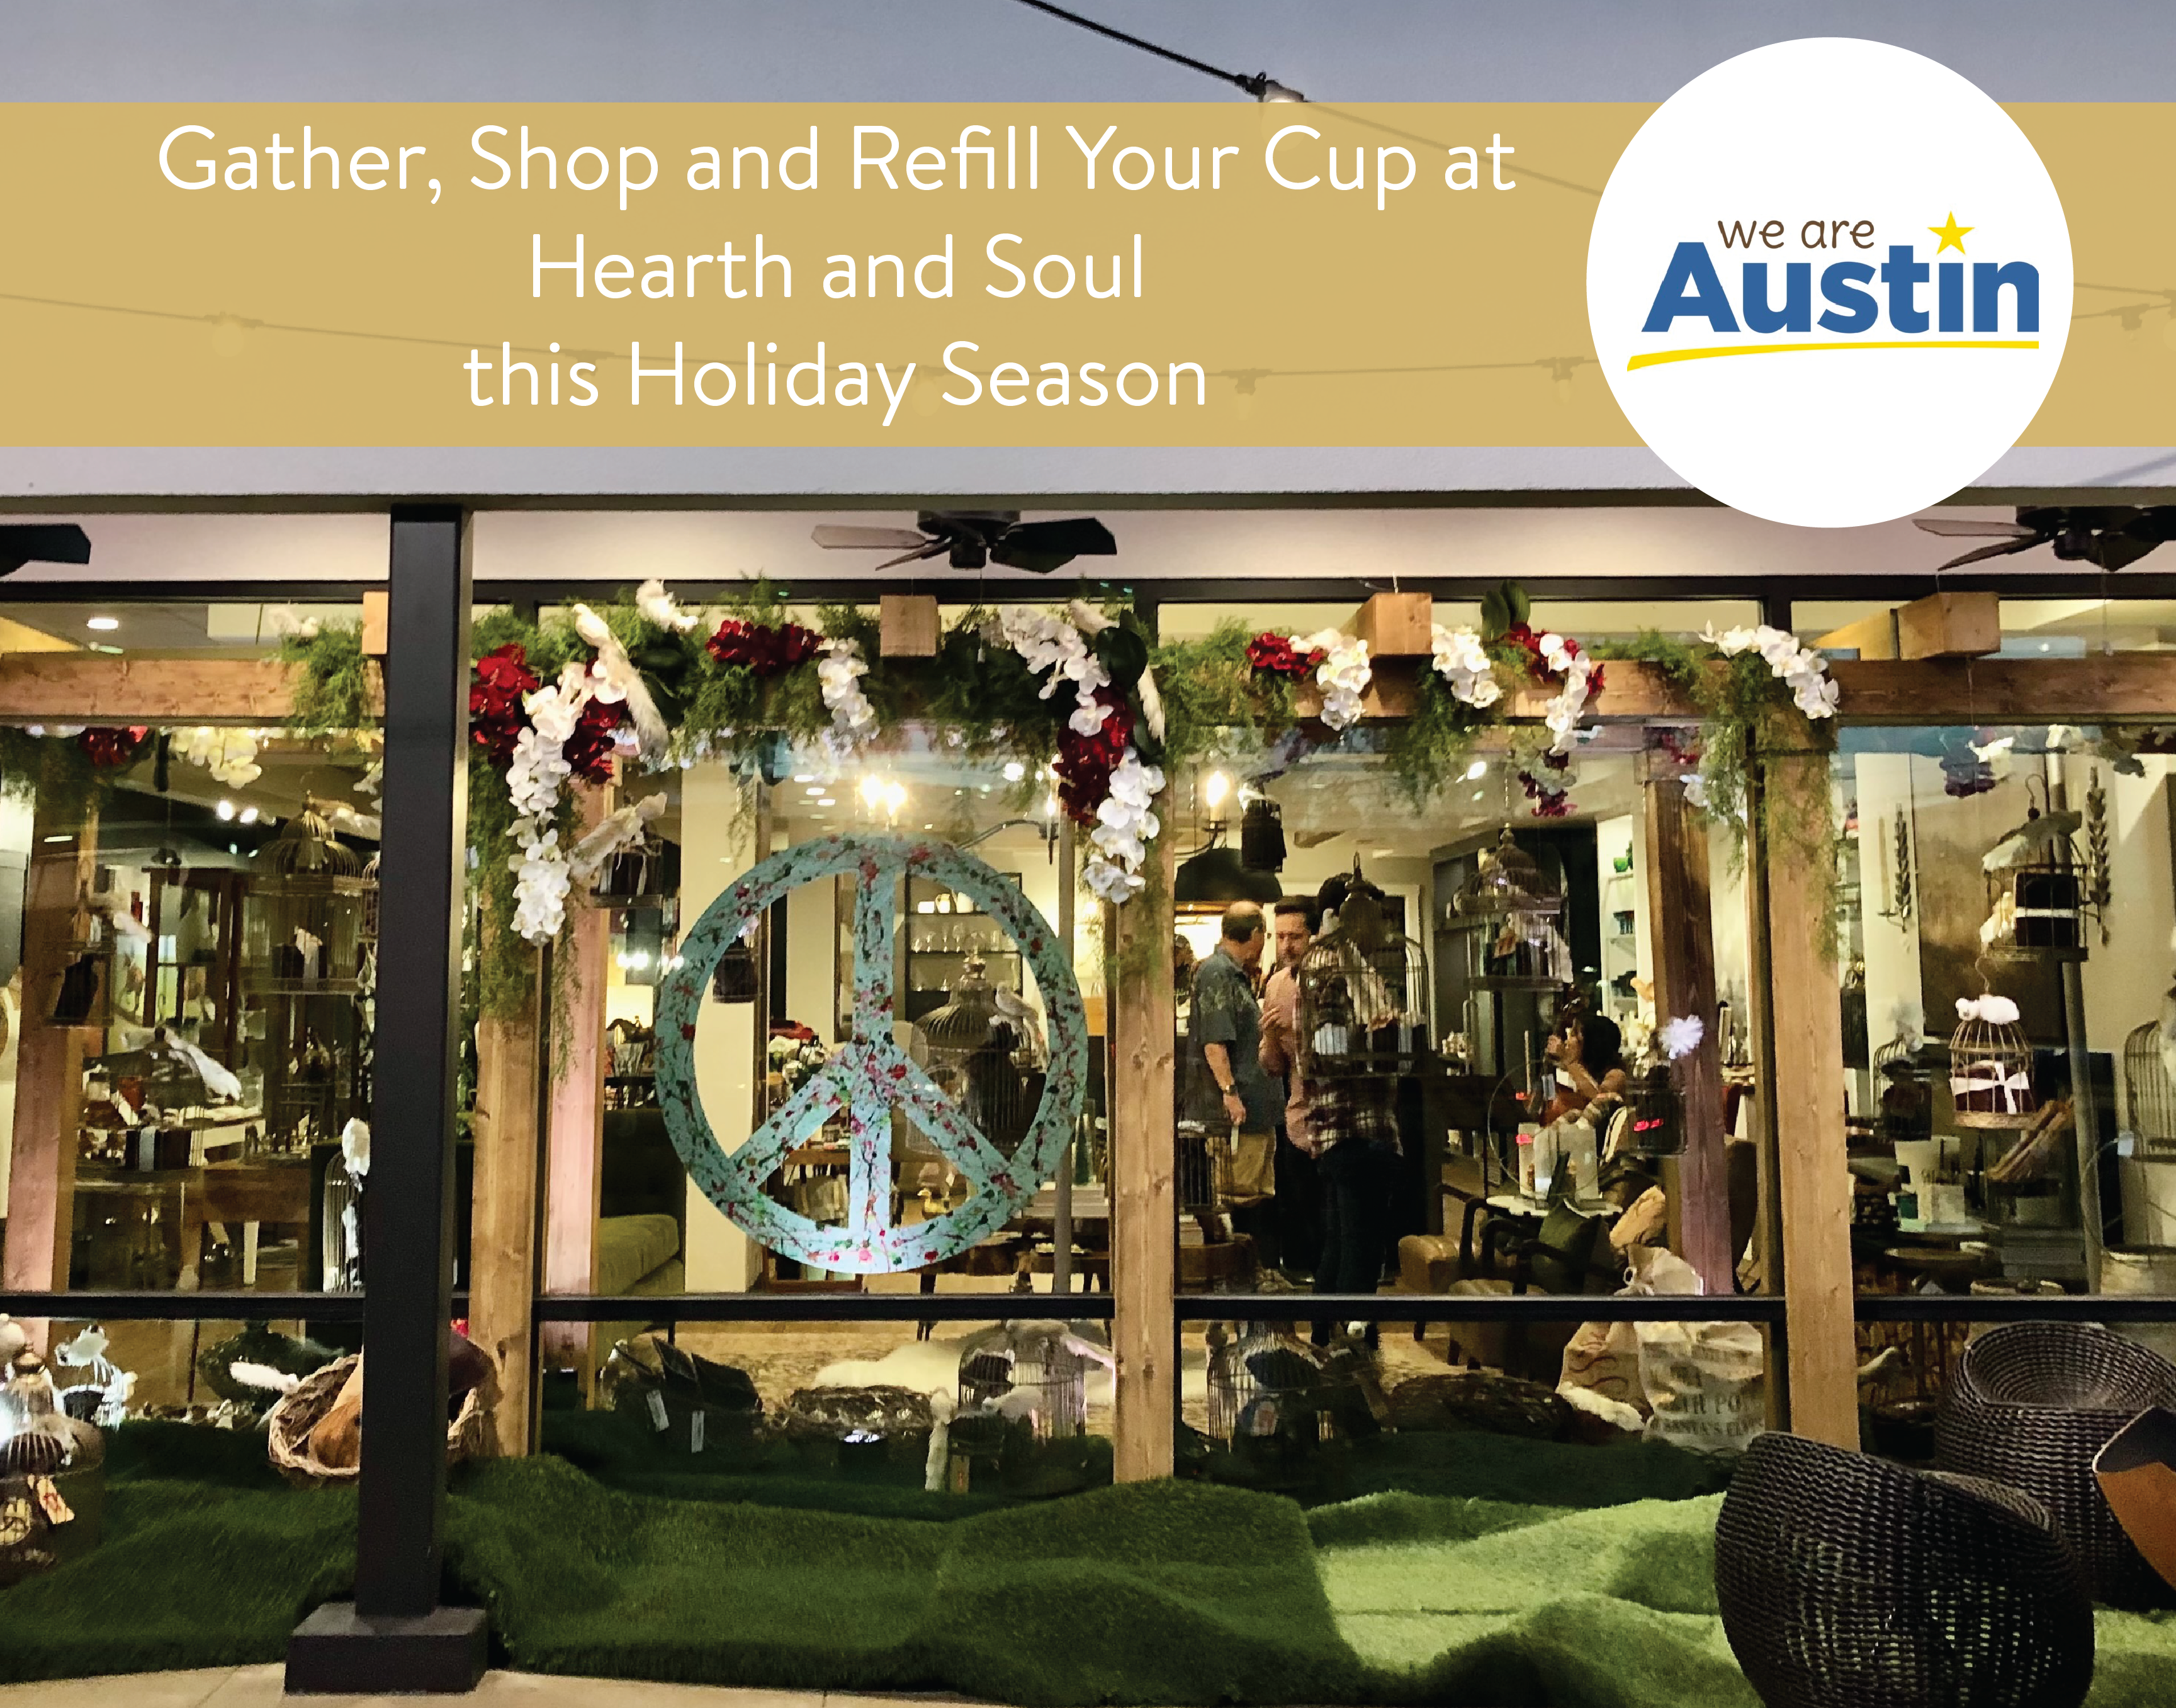 Gift guide, We are Austin, Holiday, Hearth and Soul